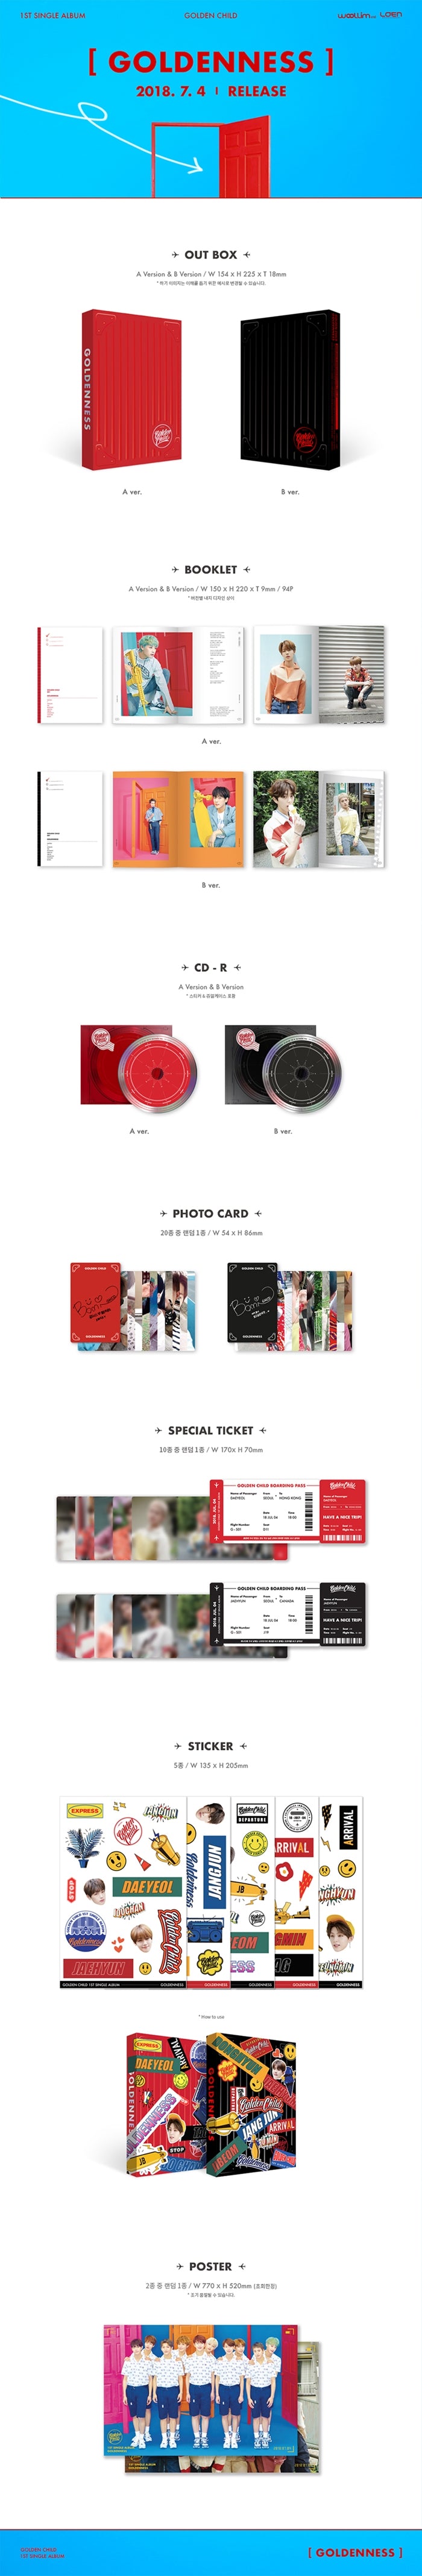 1 CD
1 Booklet (94 pages)
1 Photo Card
1 Special Ticket
5 Stickers